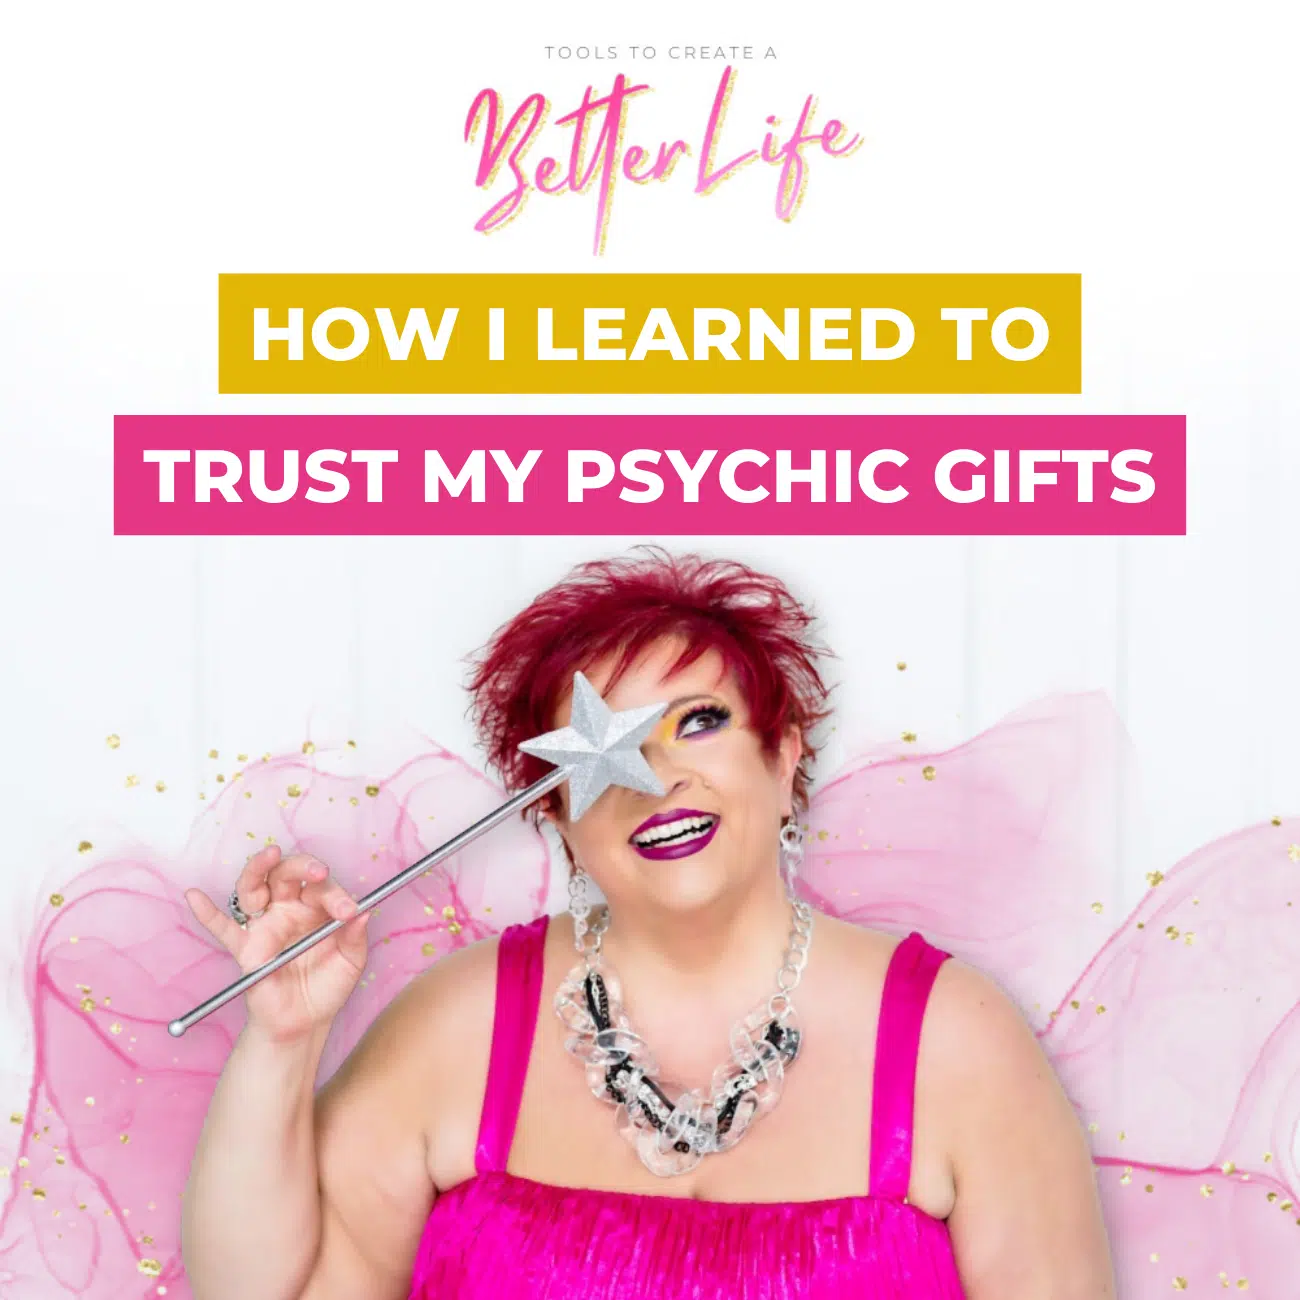 How I Learned to Trust My Psychic Gifts